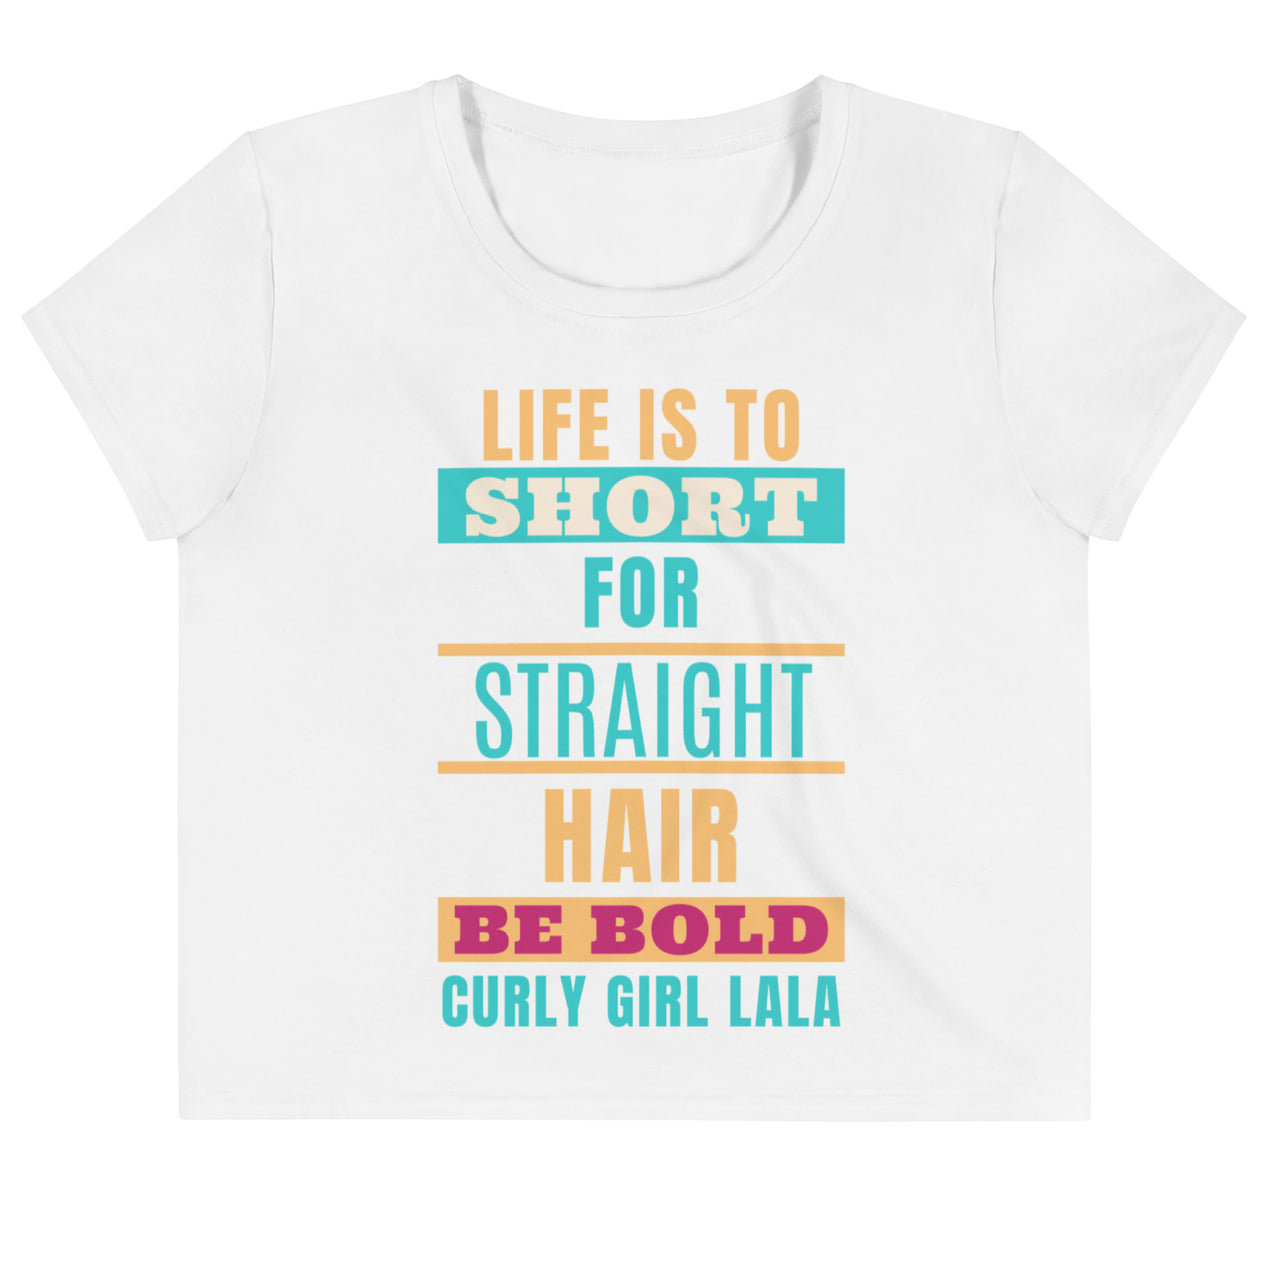 Life is to short for Straight Hair Tee